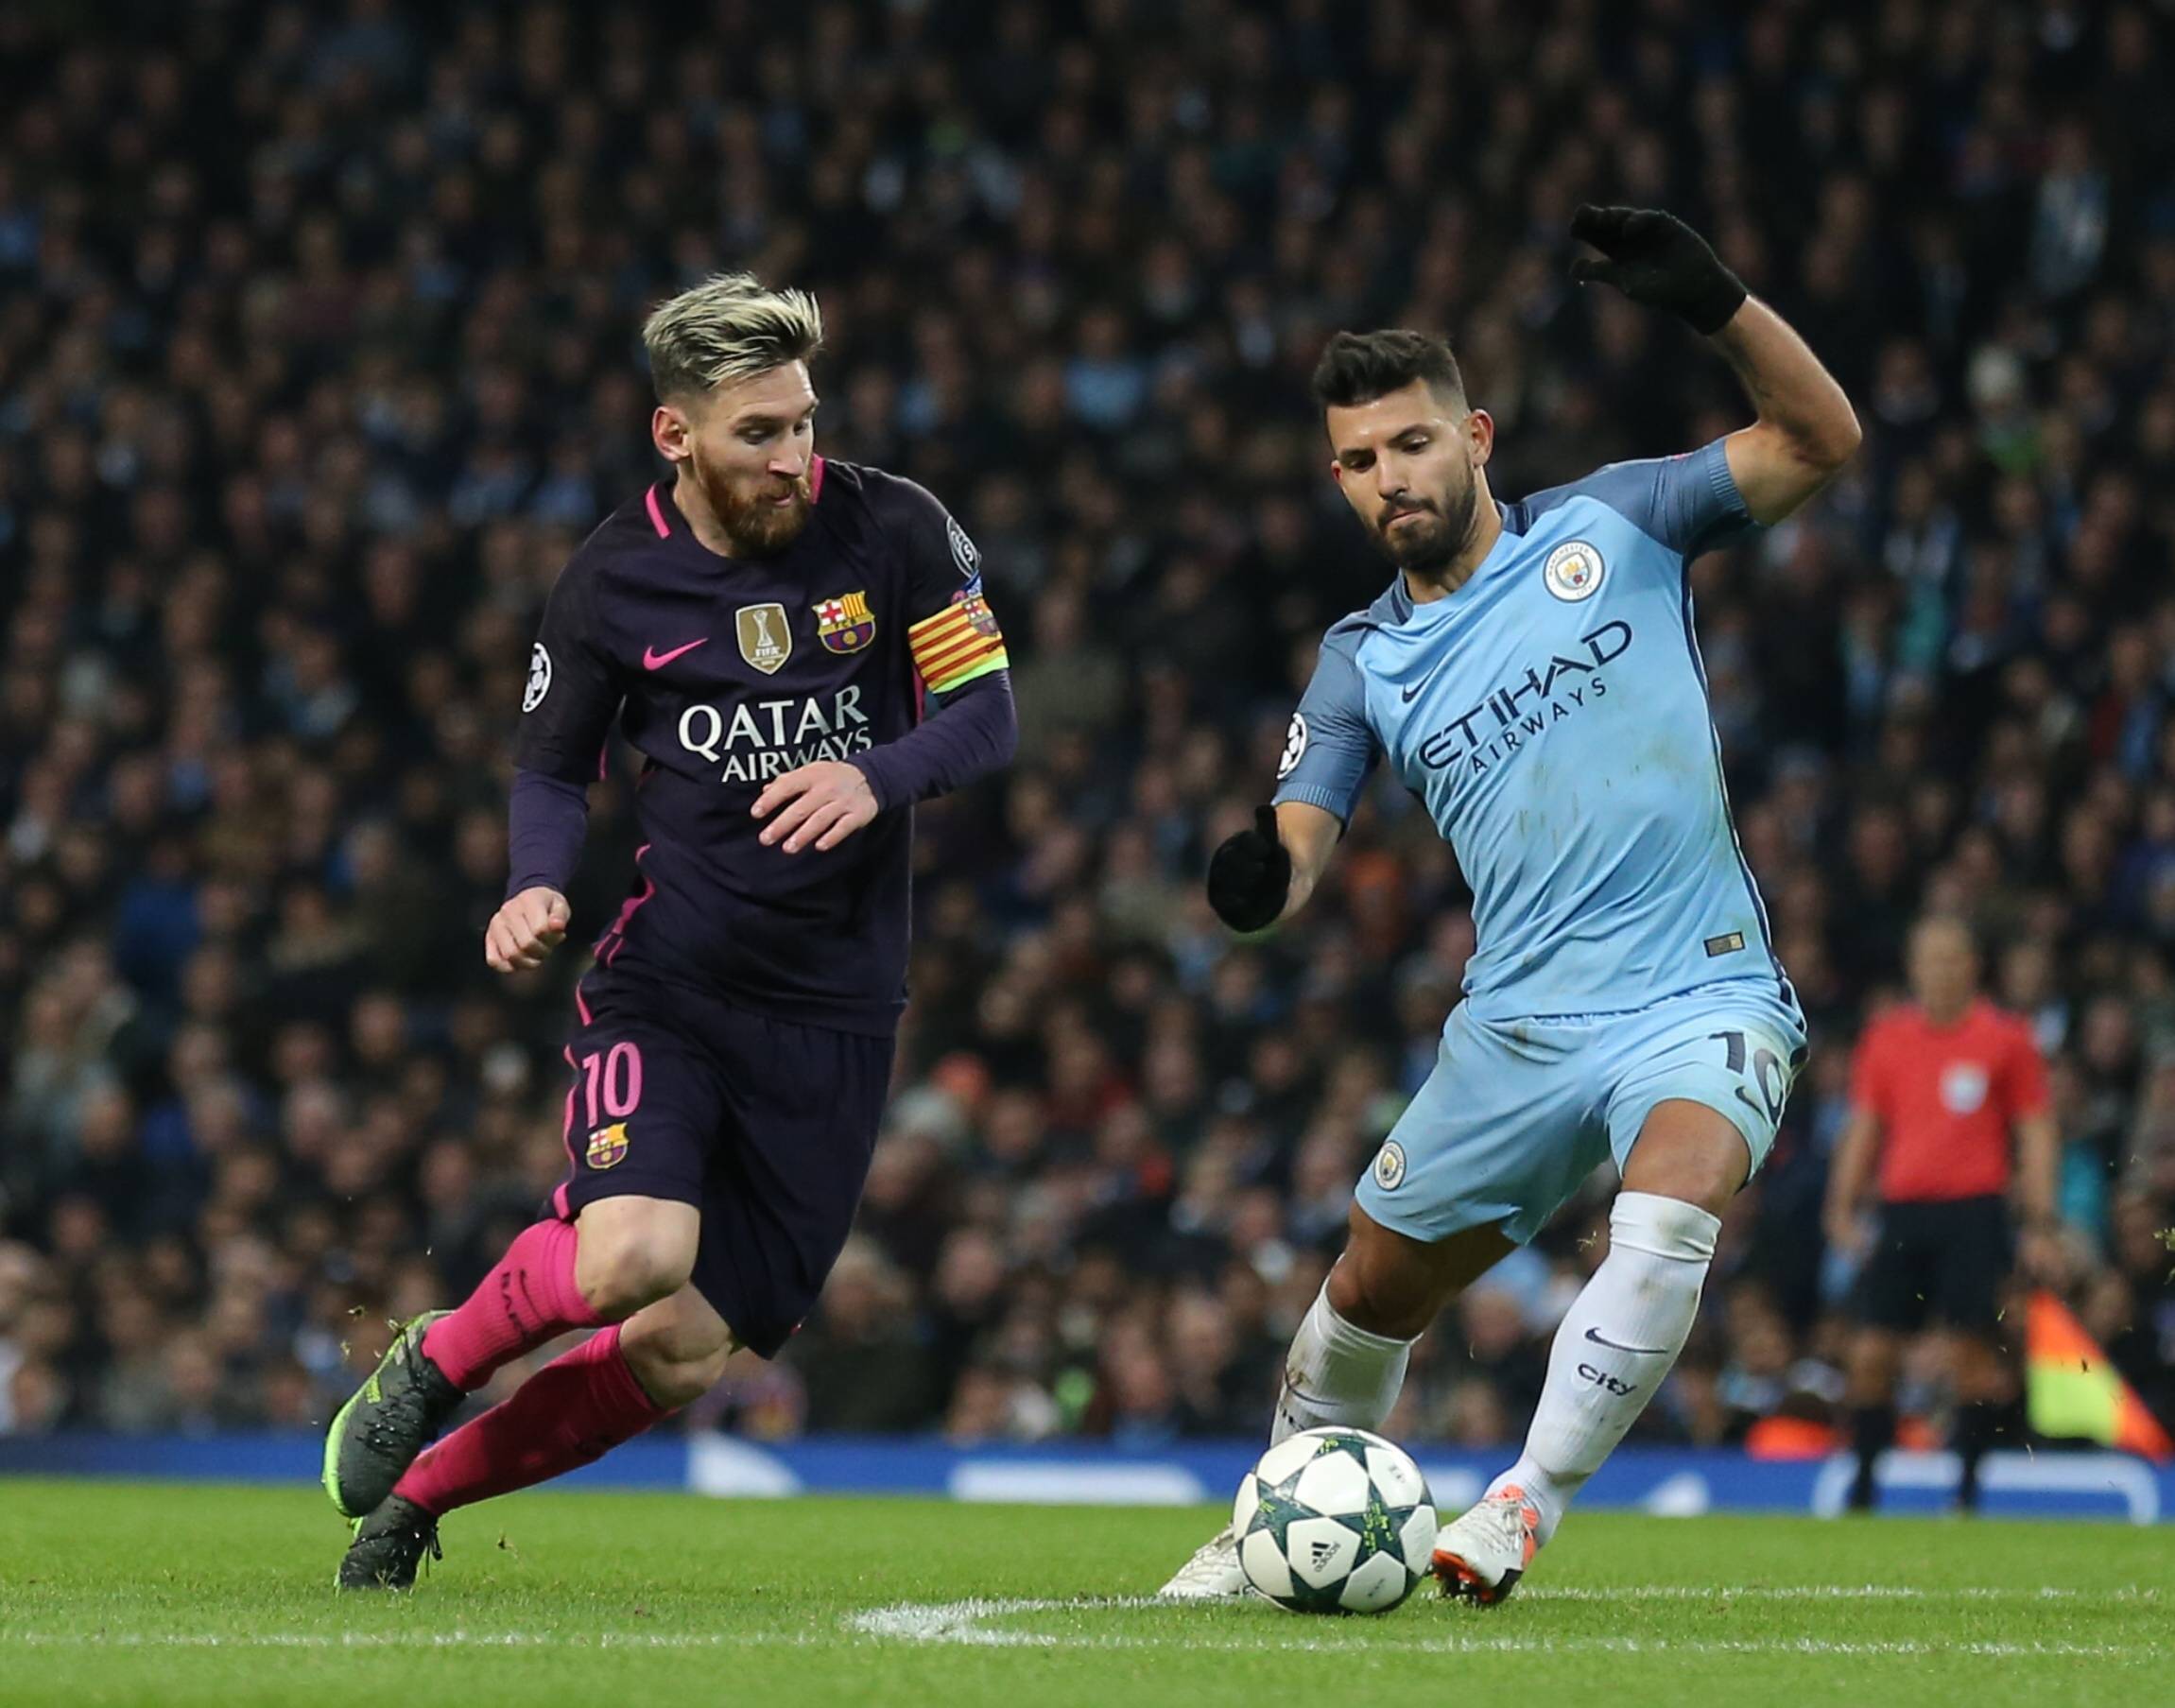 Lionel Messi Of Barcelona And Sergio Aguero Of Manchester City During The Champions League Group C Match At The Etihad